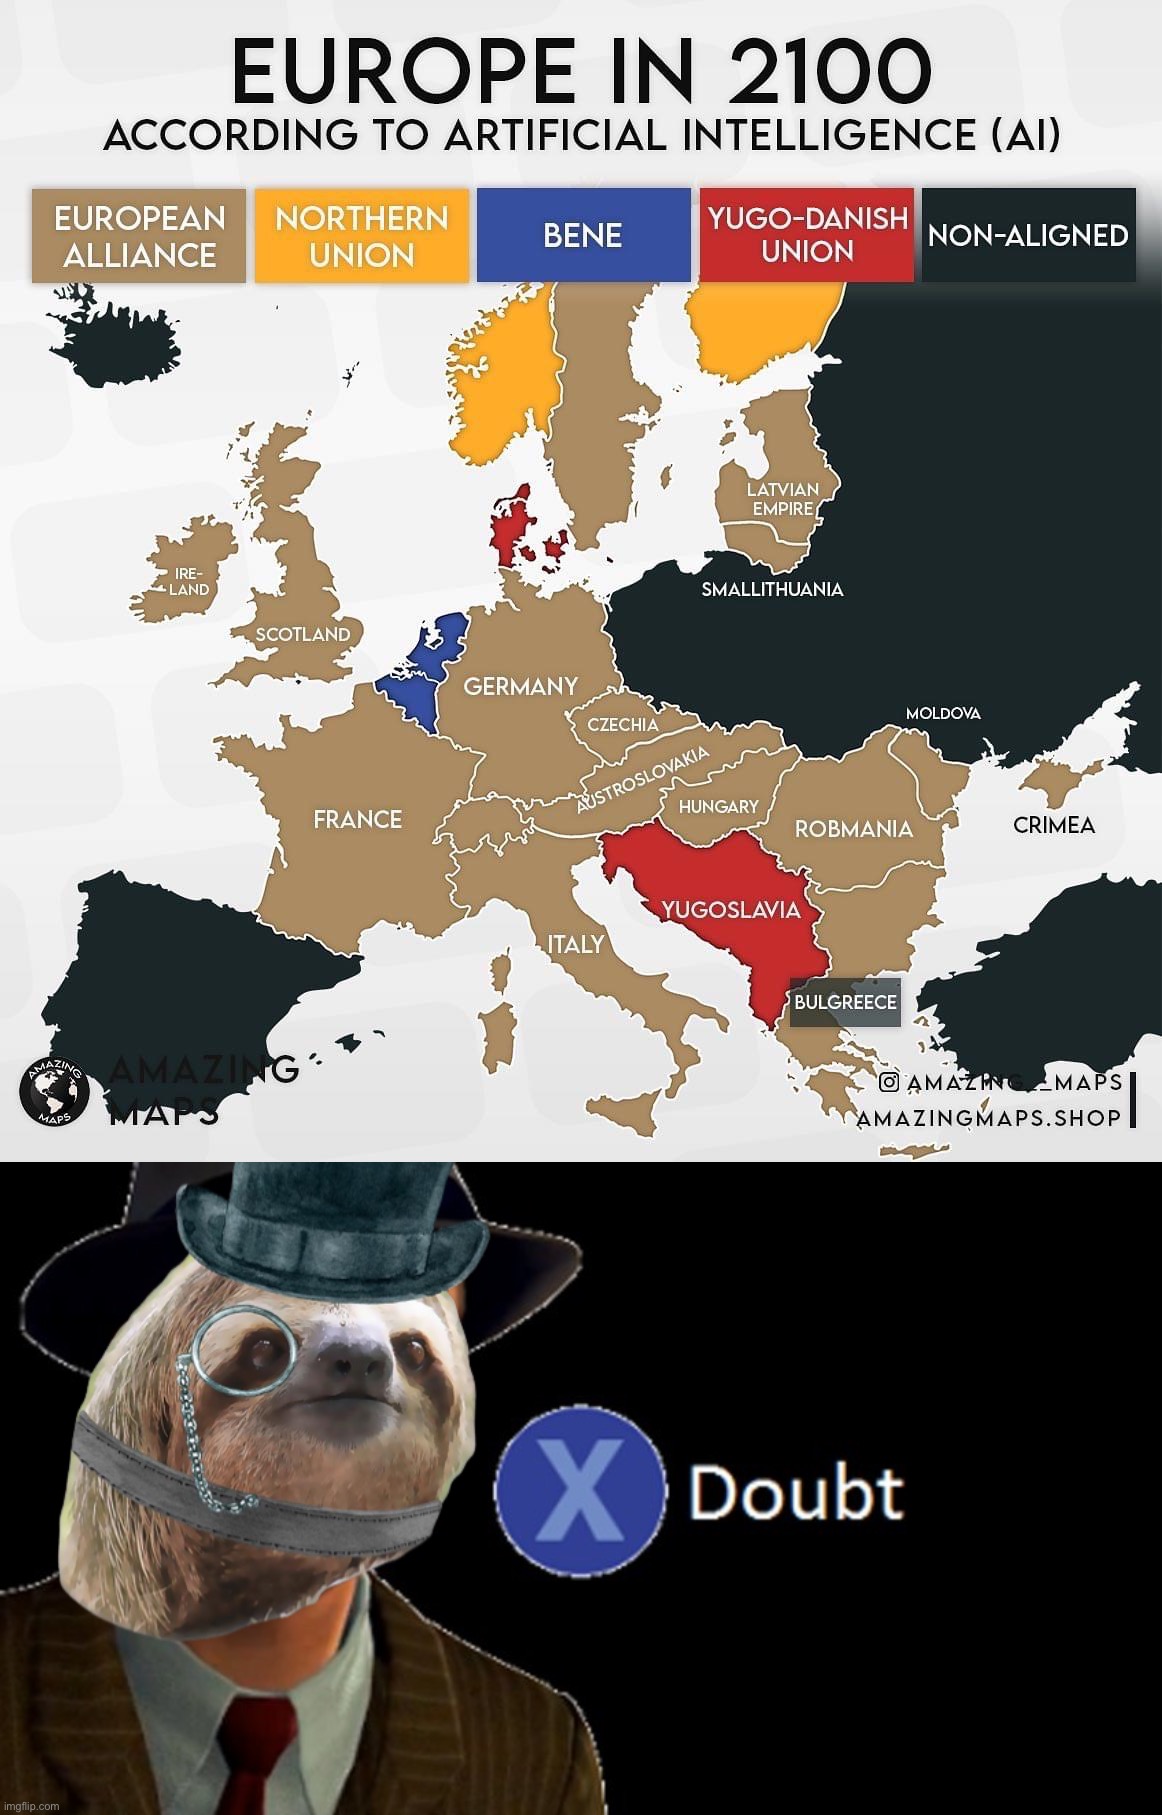 Ummmm | image tagged in europe in 2100,l a noire press x to doubt,artificial intelligence,artificial idiocy,ai,wot | made w/ Imgflip meme maker